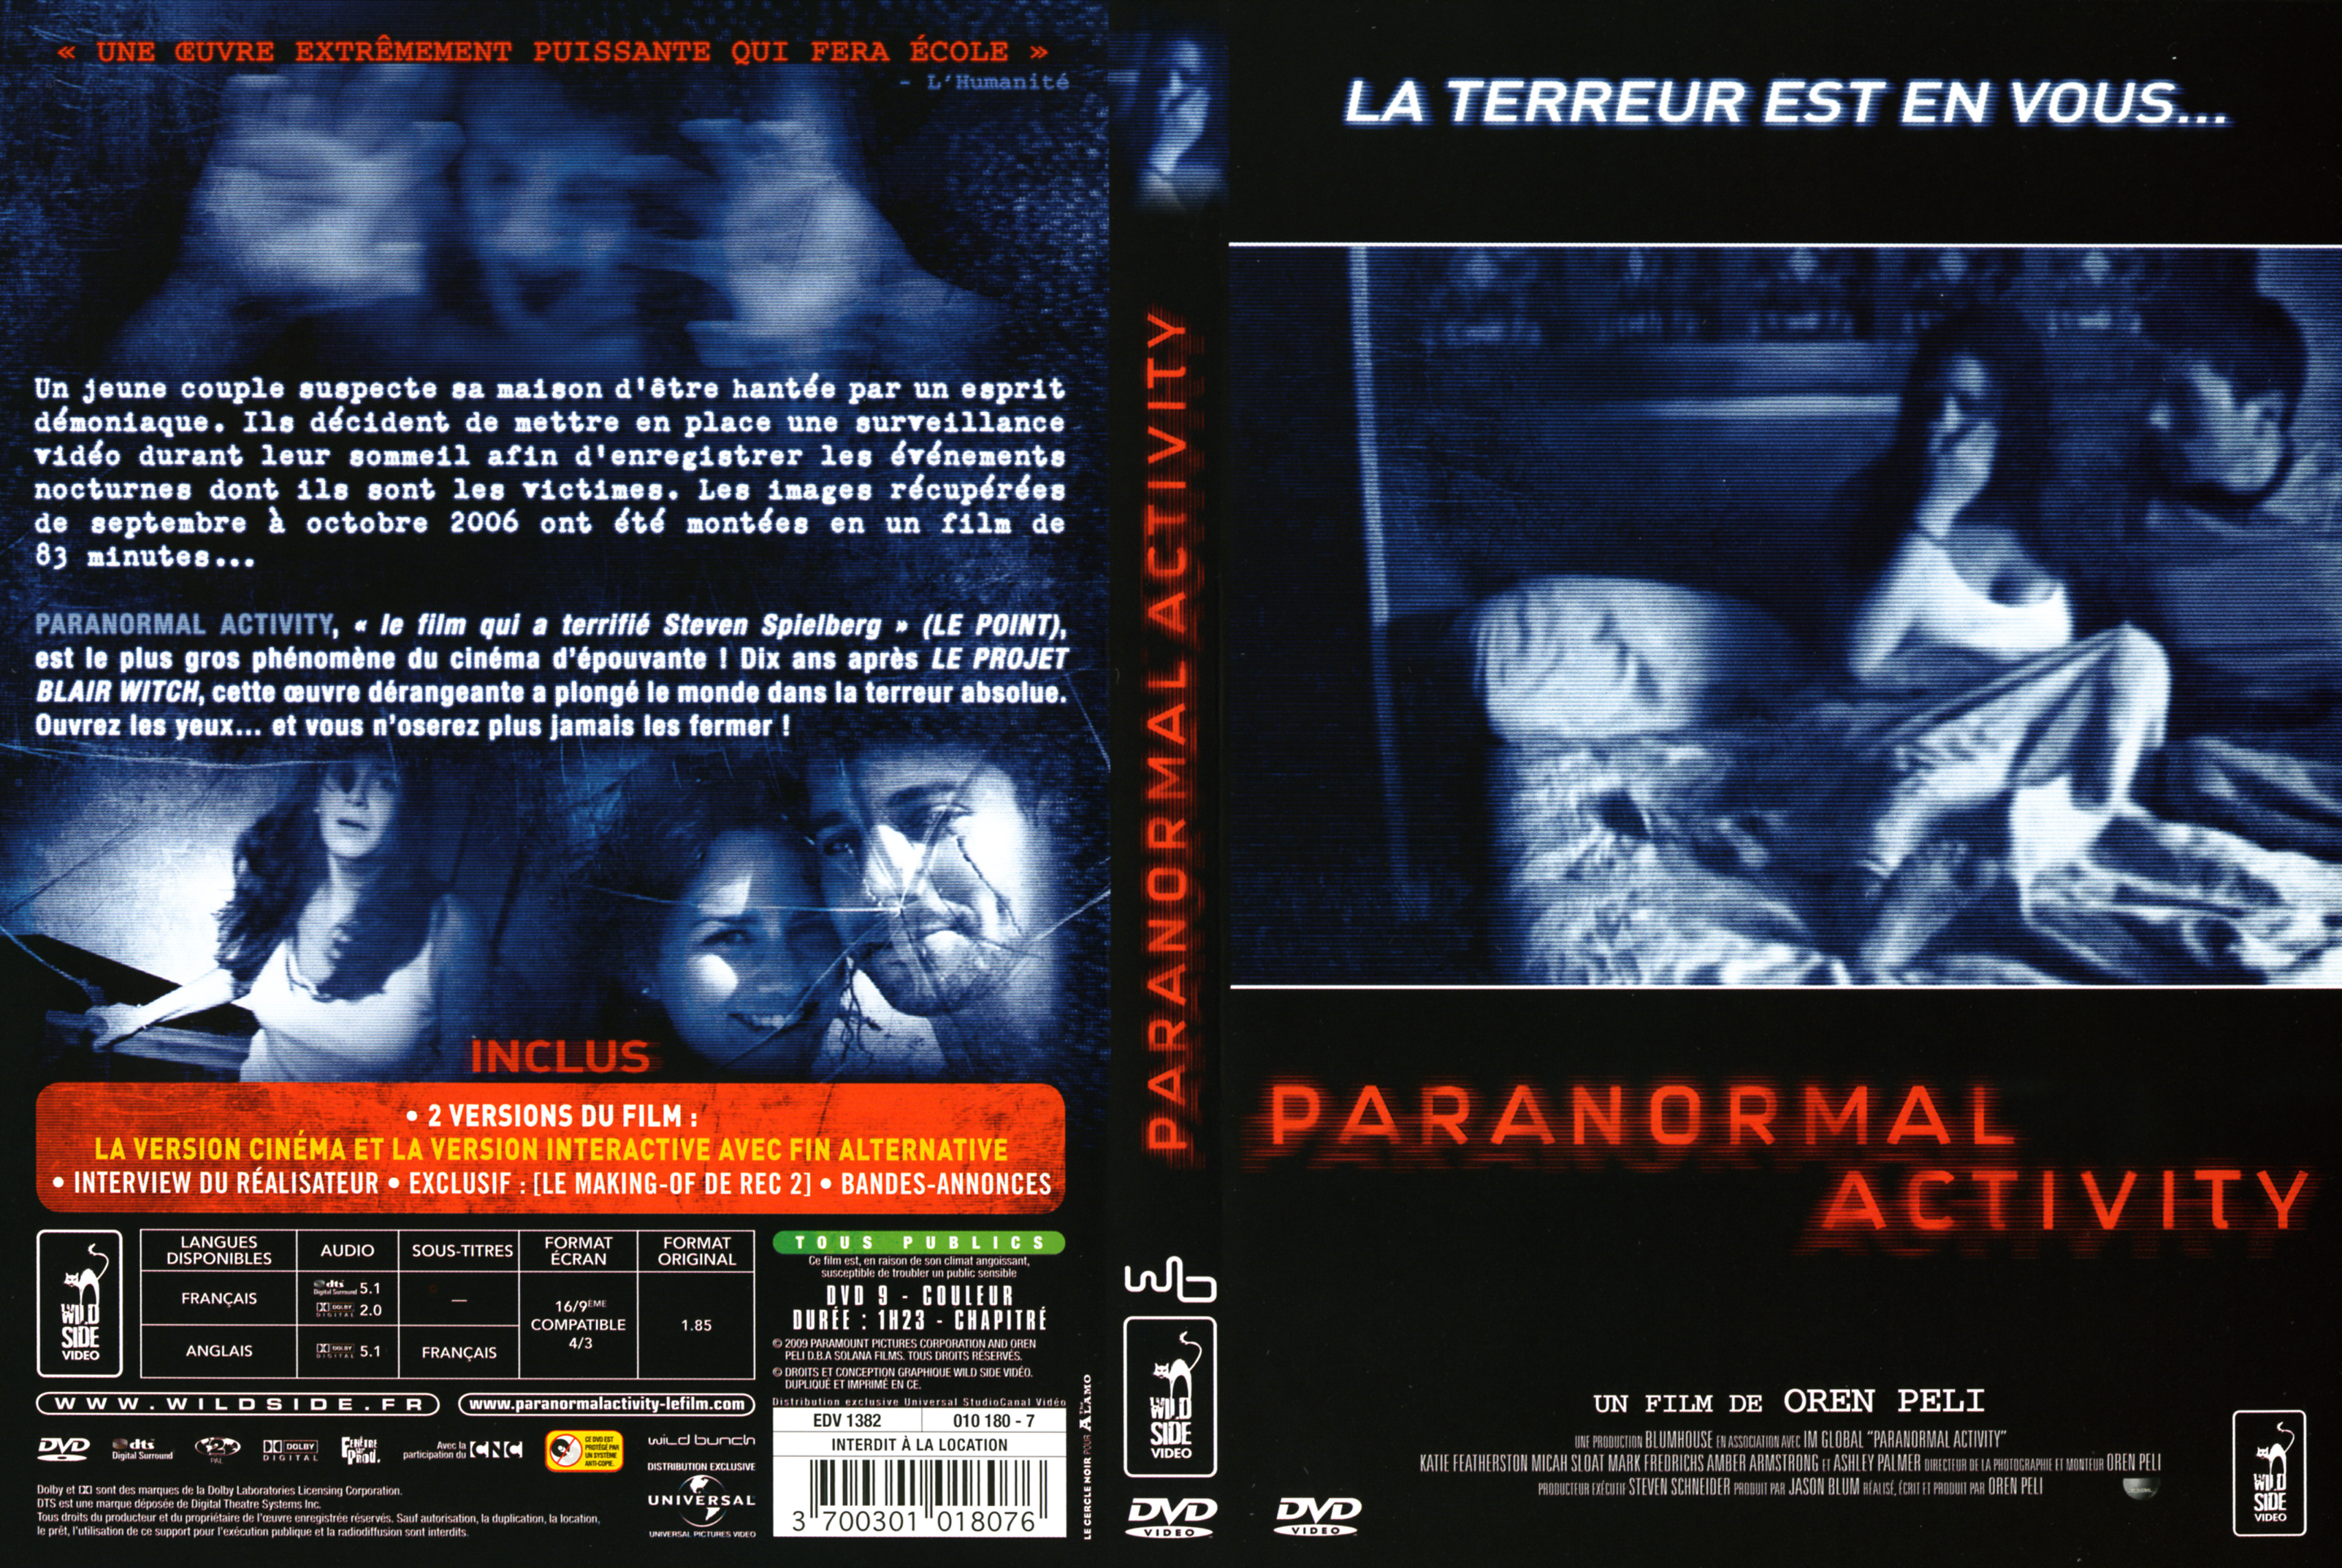 Jaquette DVD Paranormal activity